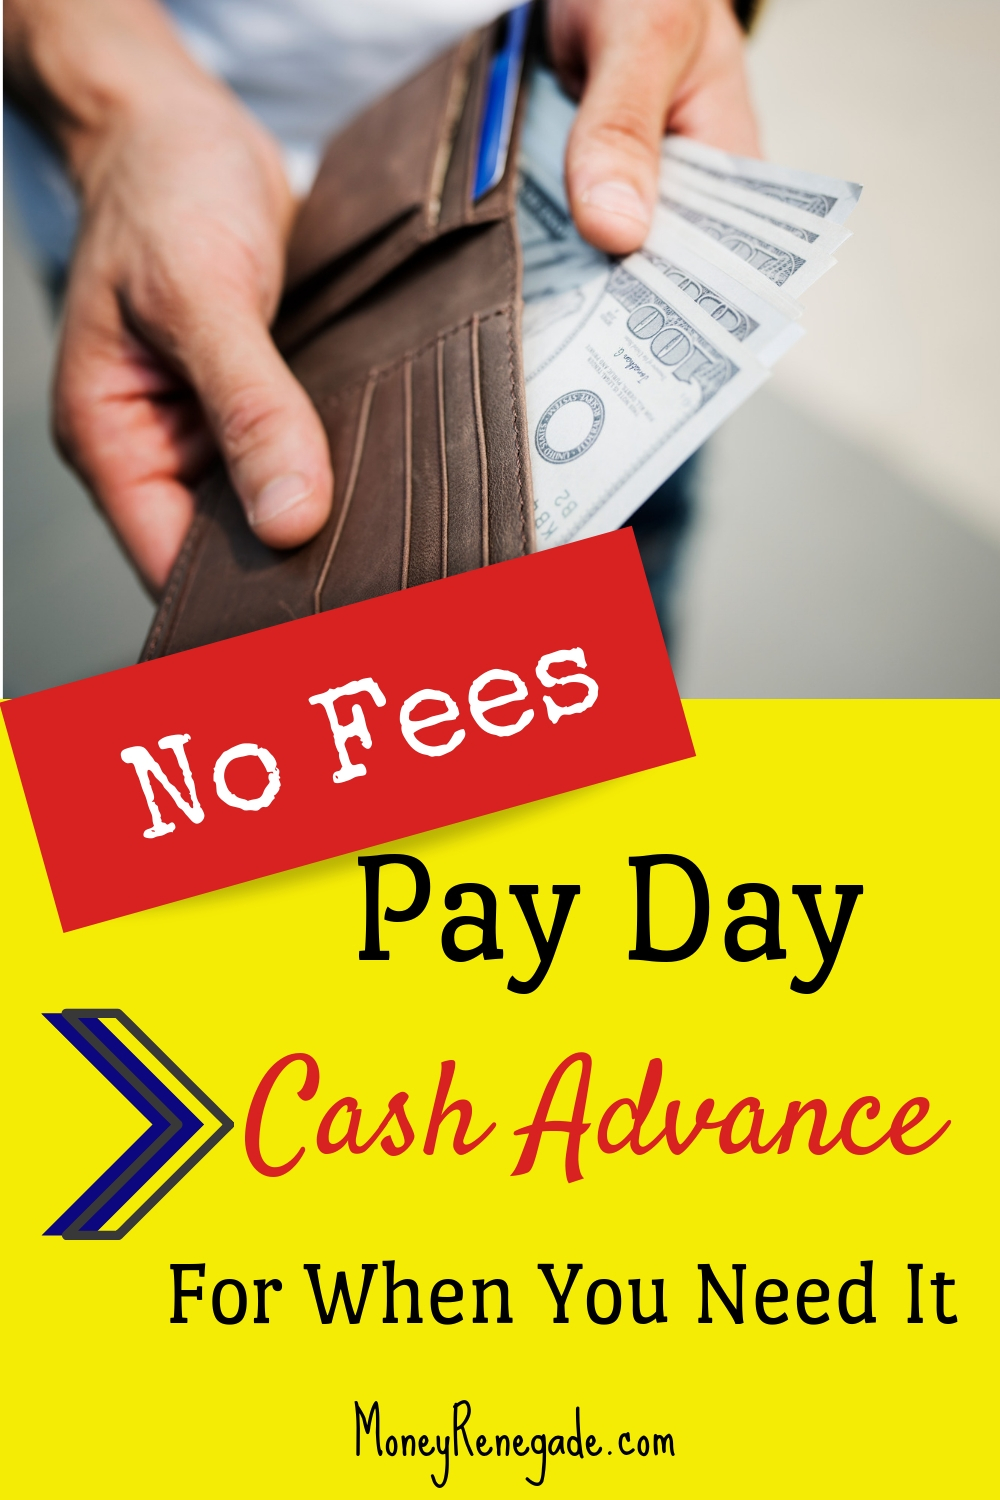 Pay day cash advance without fees